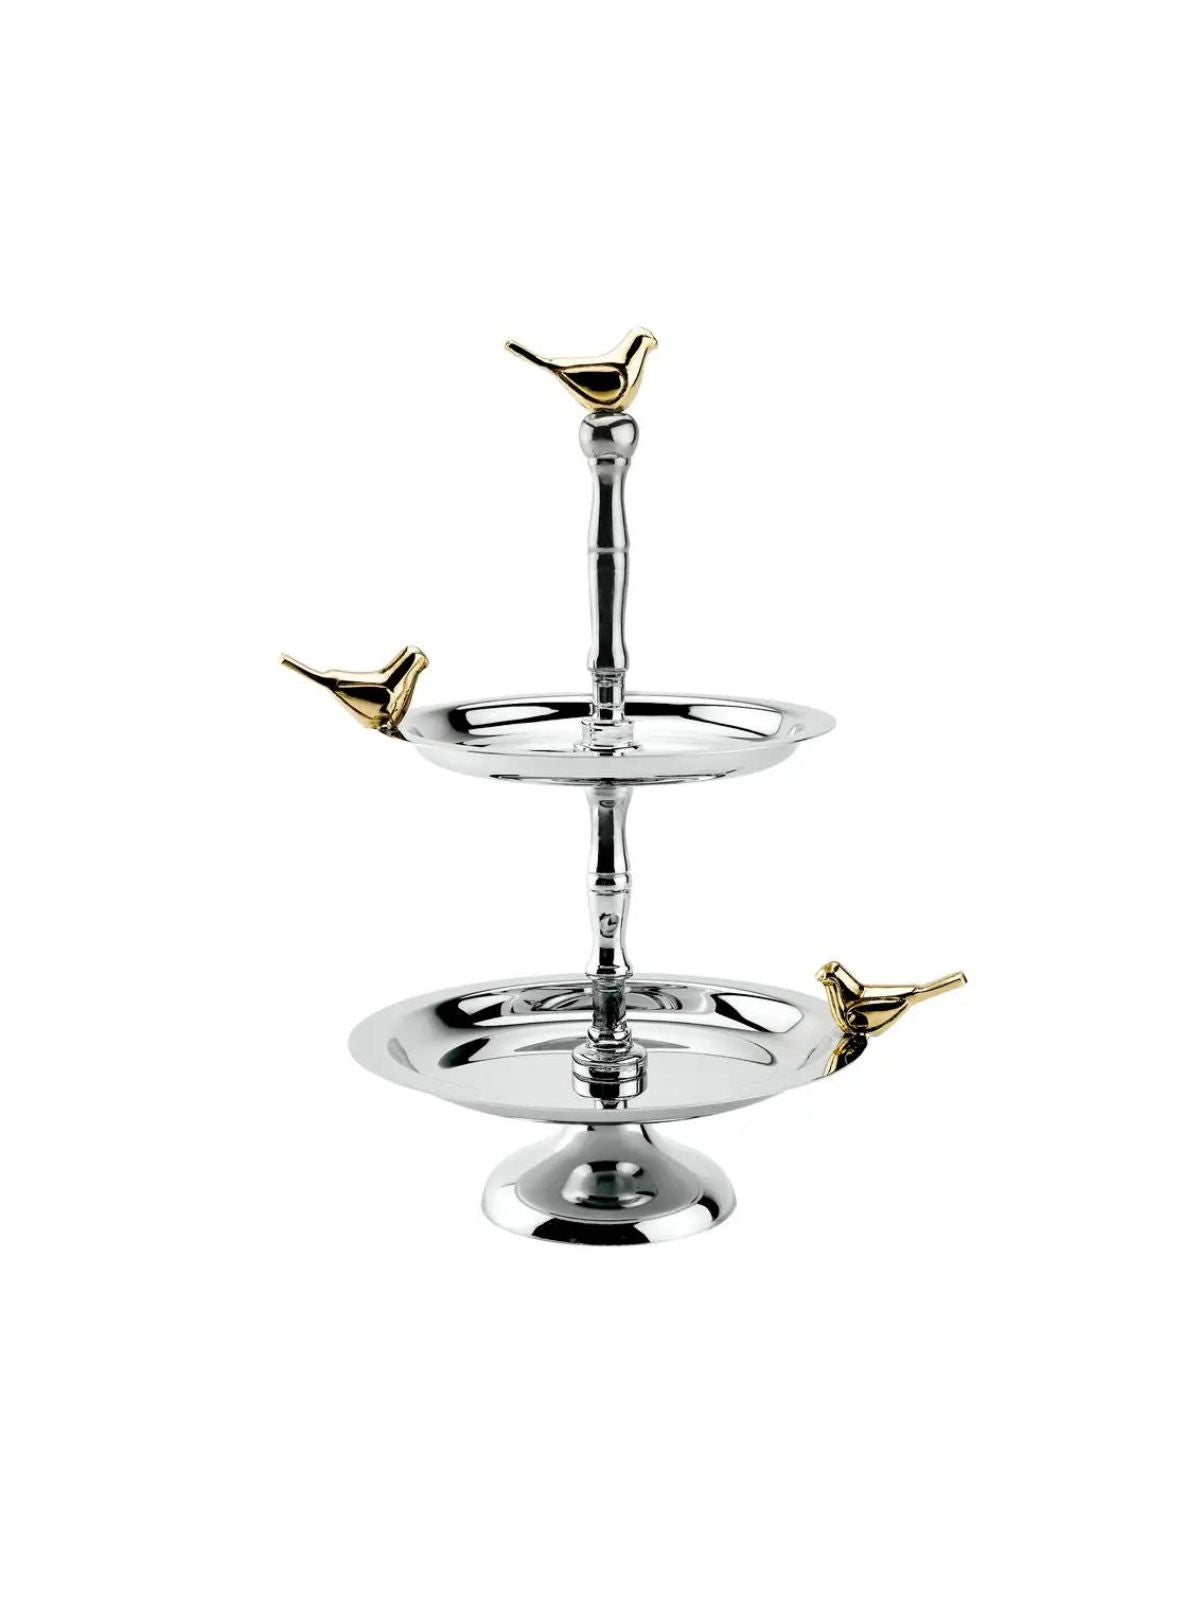 Two Tier Cake Stand with Charming Gold Birds.